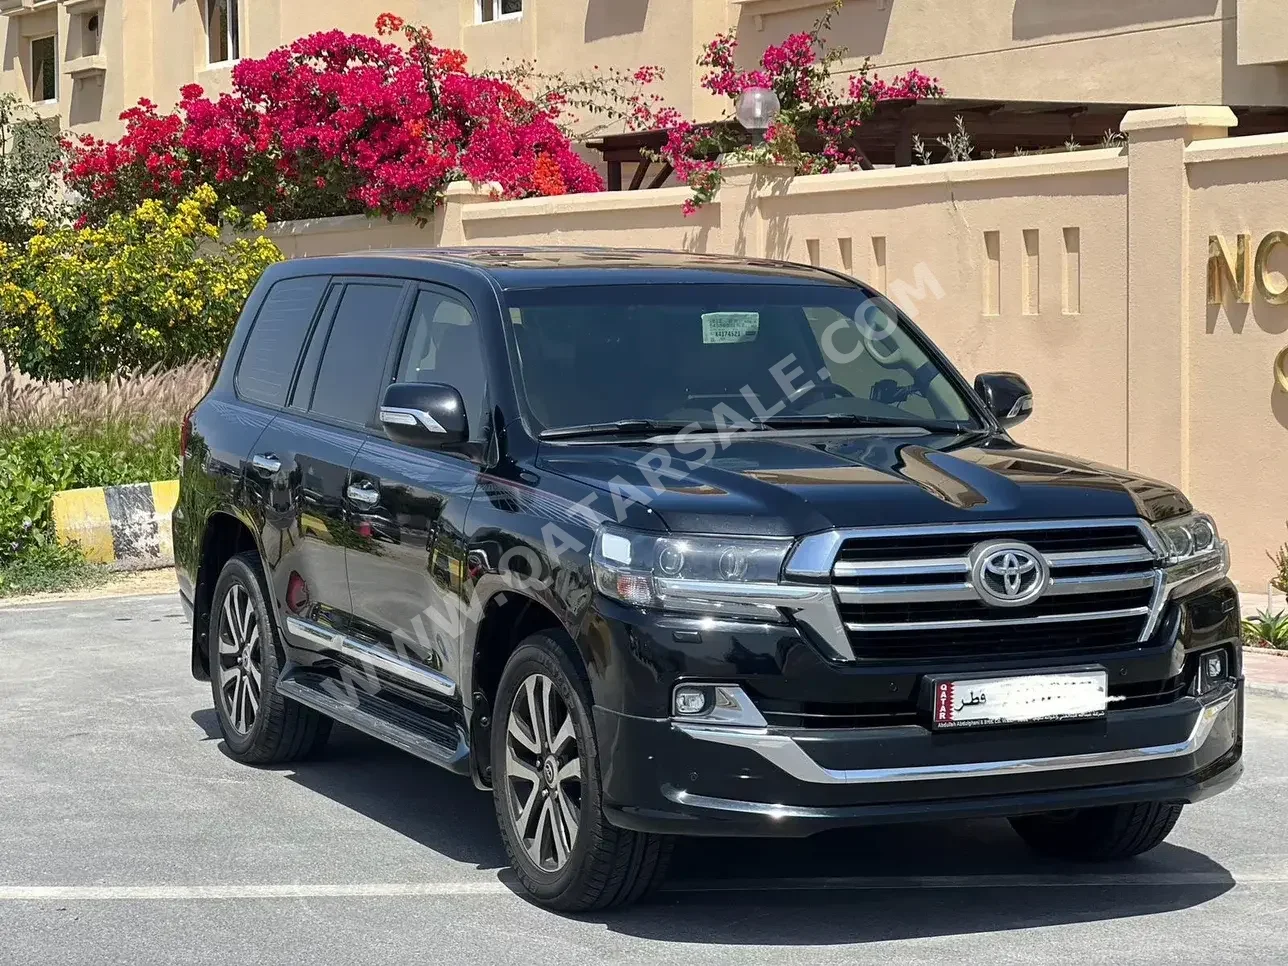 Toyota  Land Cruiser  GXR- Grand Touring  2019  Automatic  150,000 Km  8 Cylinder  Four Wheel Drive (4WD)  SUV  Black